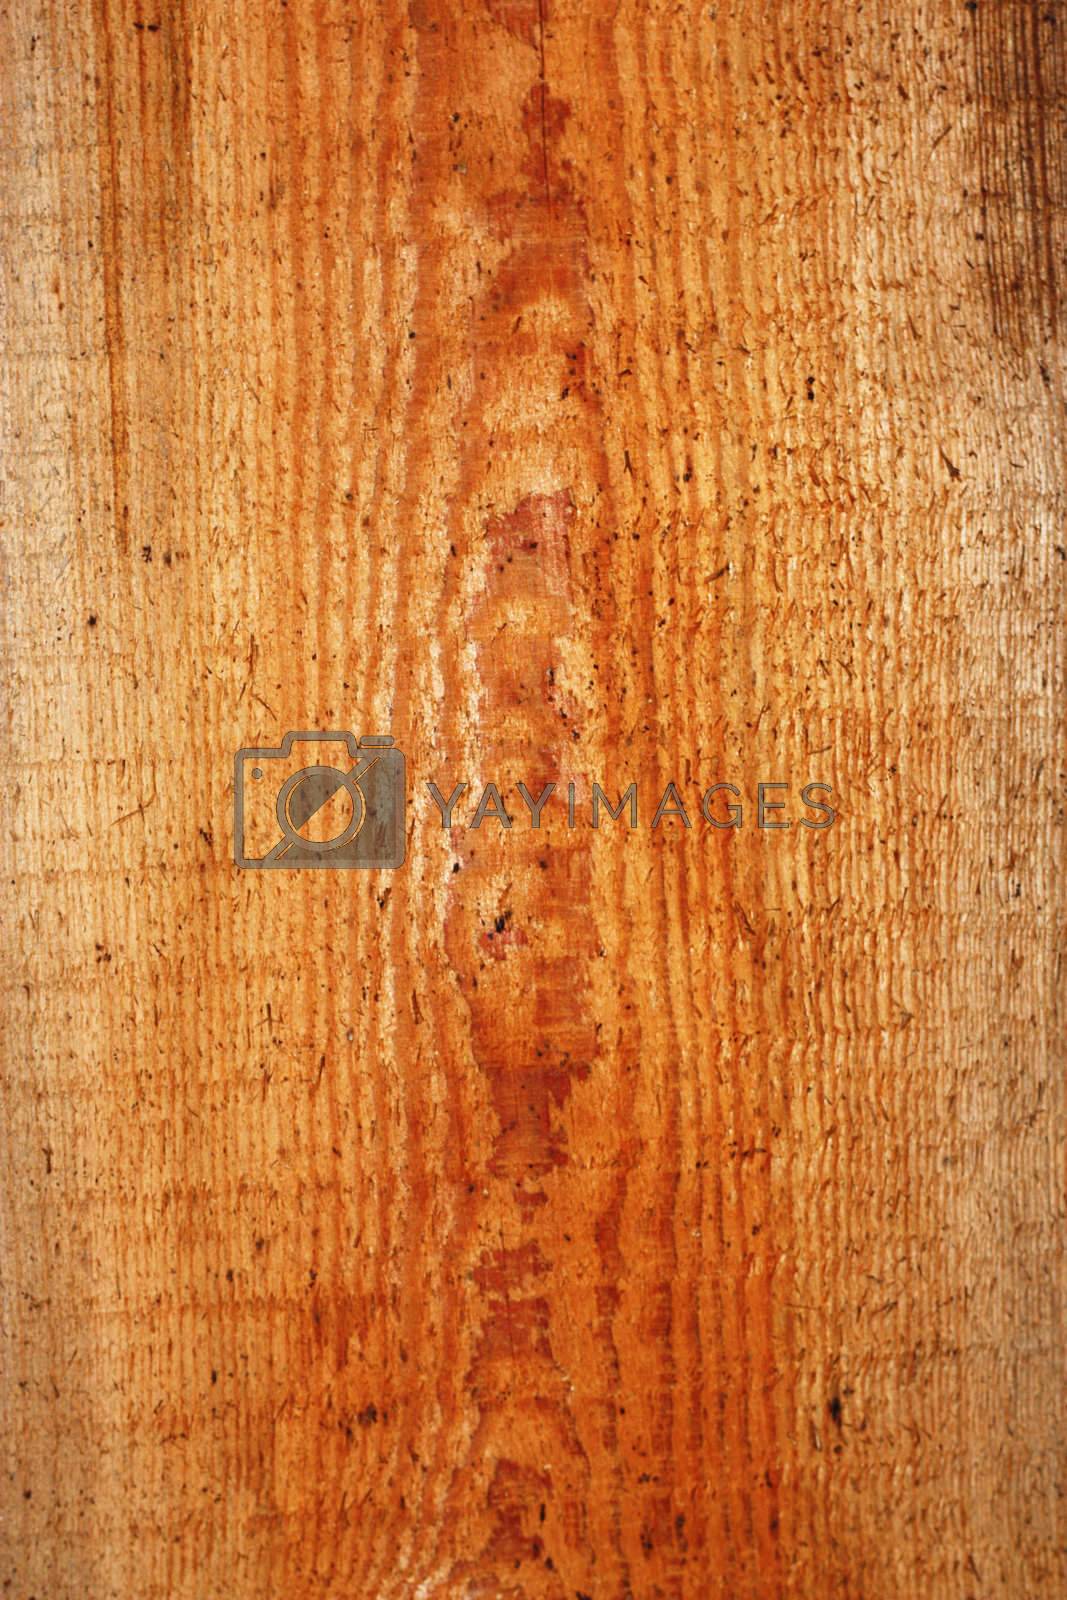 Royalty free image of old wood plank board background     by schankz